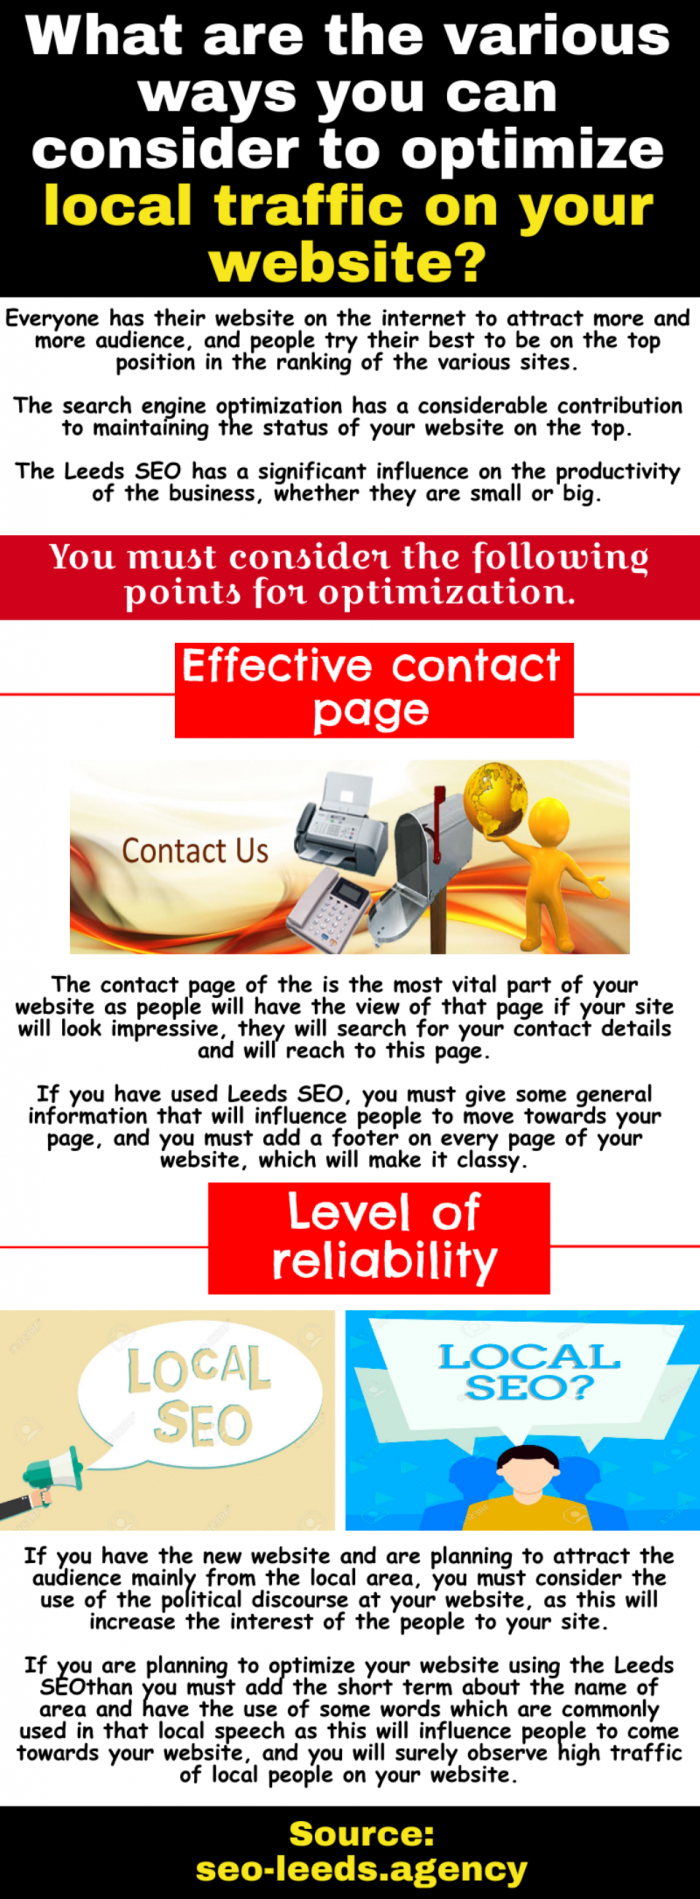 Leeds SEO has the significant influence on providing the effective contents for the blogs